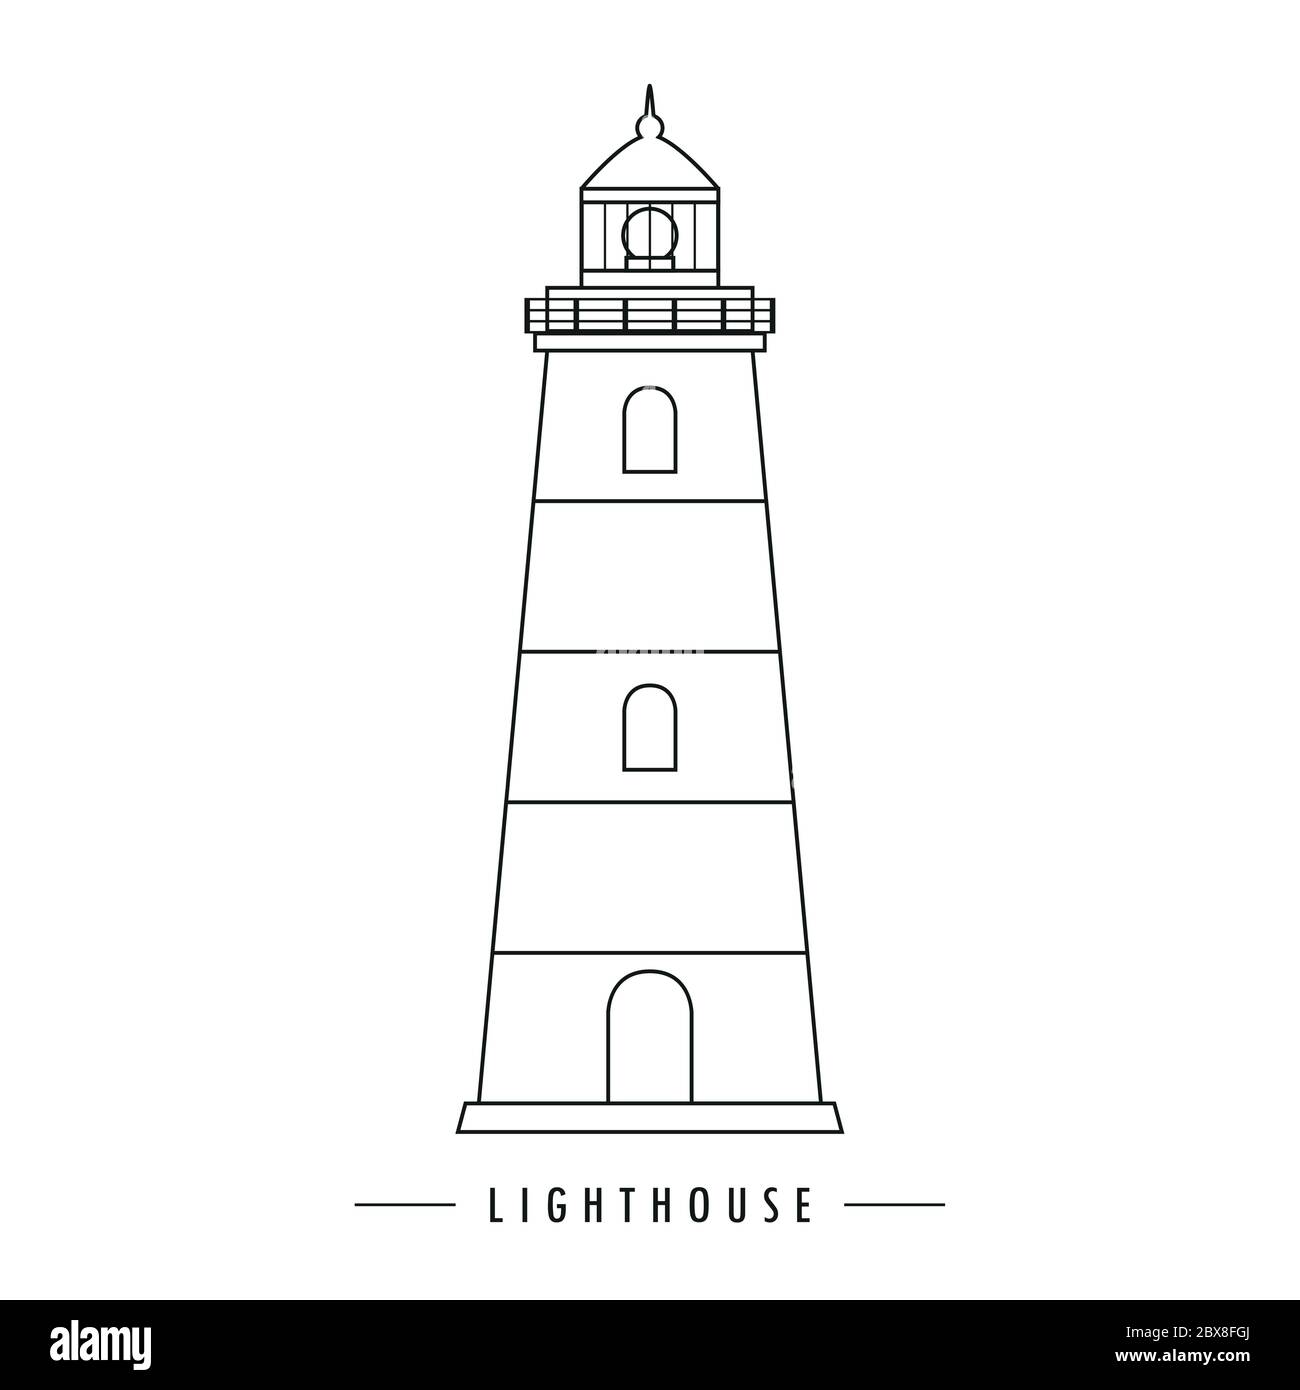 Lighthouse drawing Lighthouse on sea shore sketch  AFF drawing  Lighthouse sea sketch shore ad  Lighthouse drawing Lighthouse art  Sea drawing